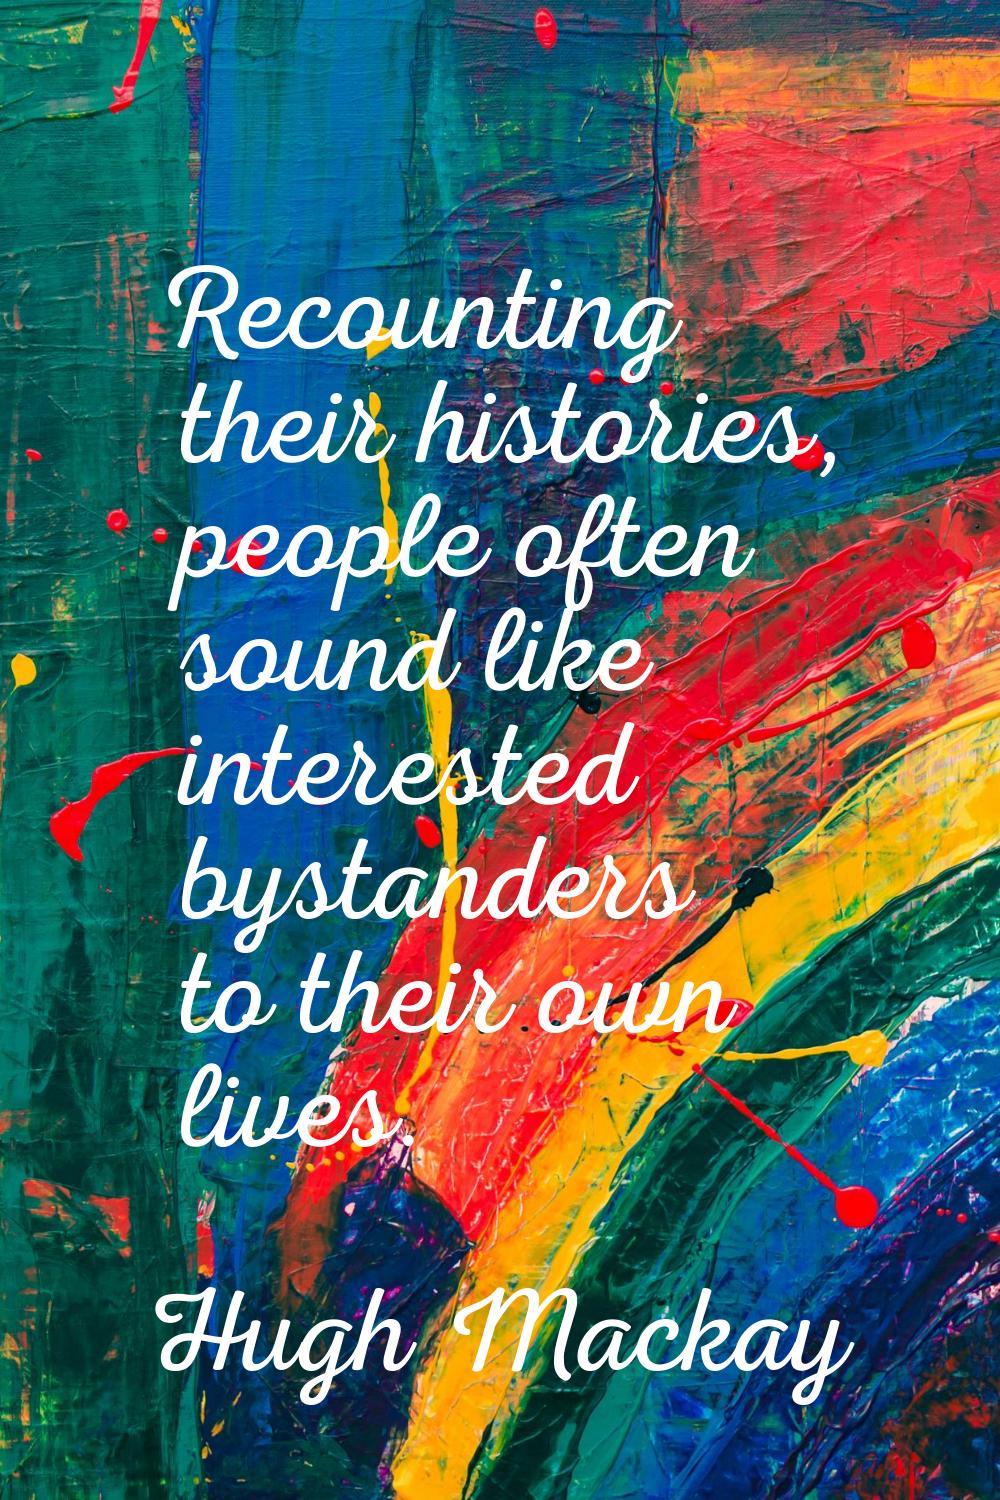 Recounting their histories, people often sound like interested bystanders to their own lives.